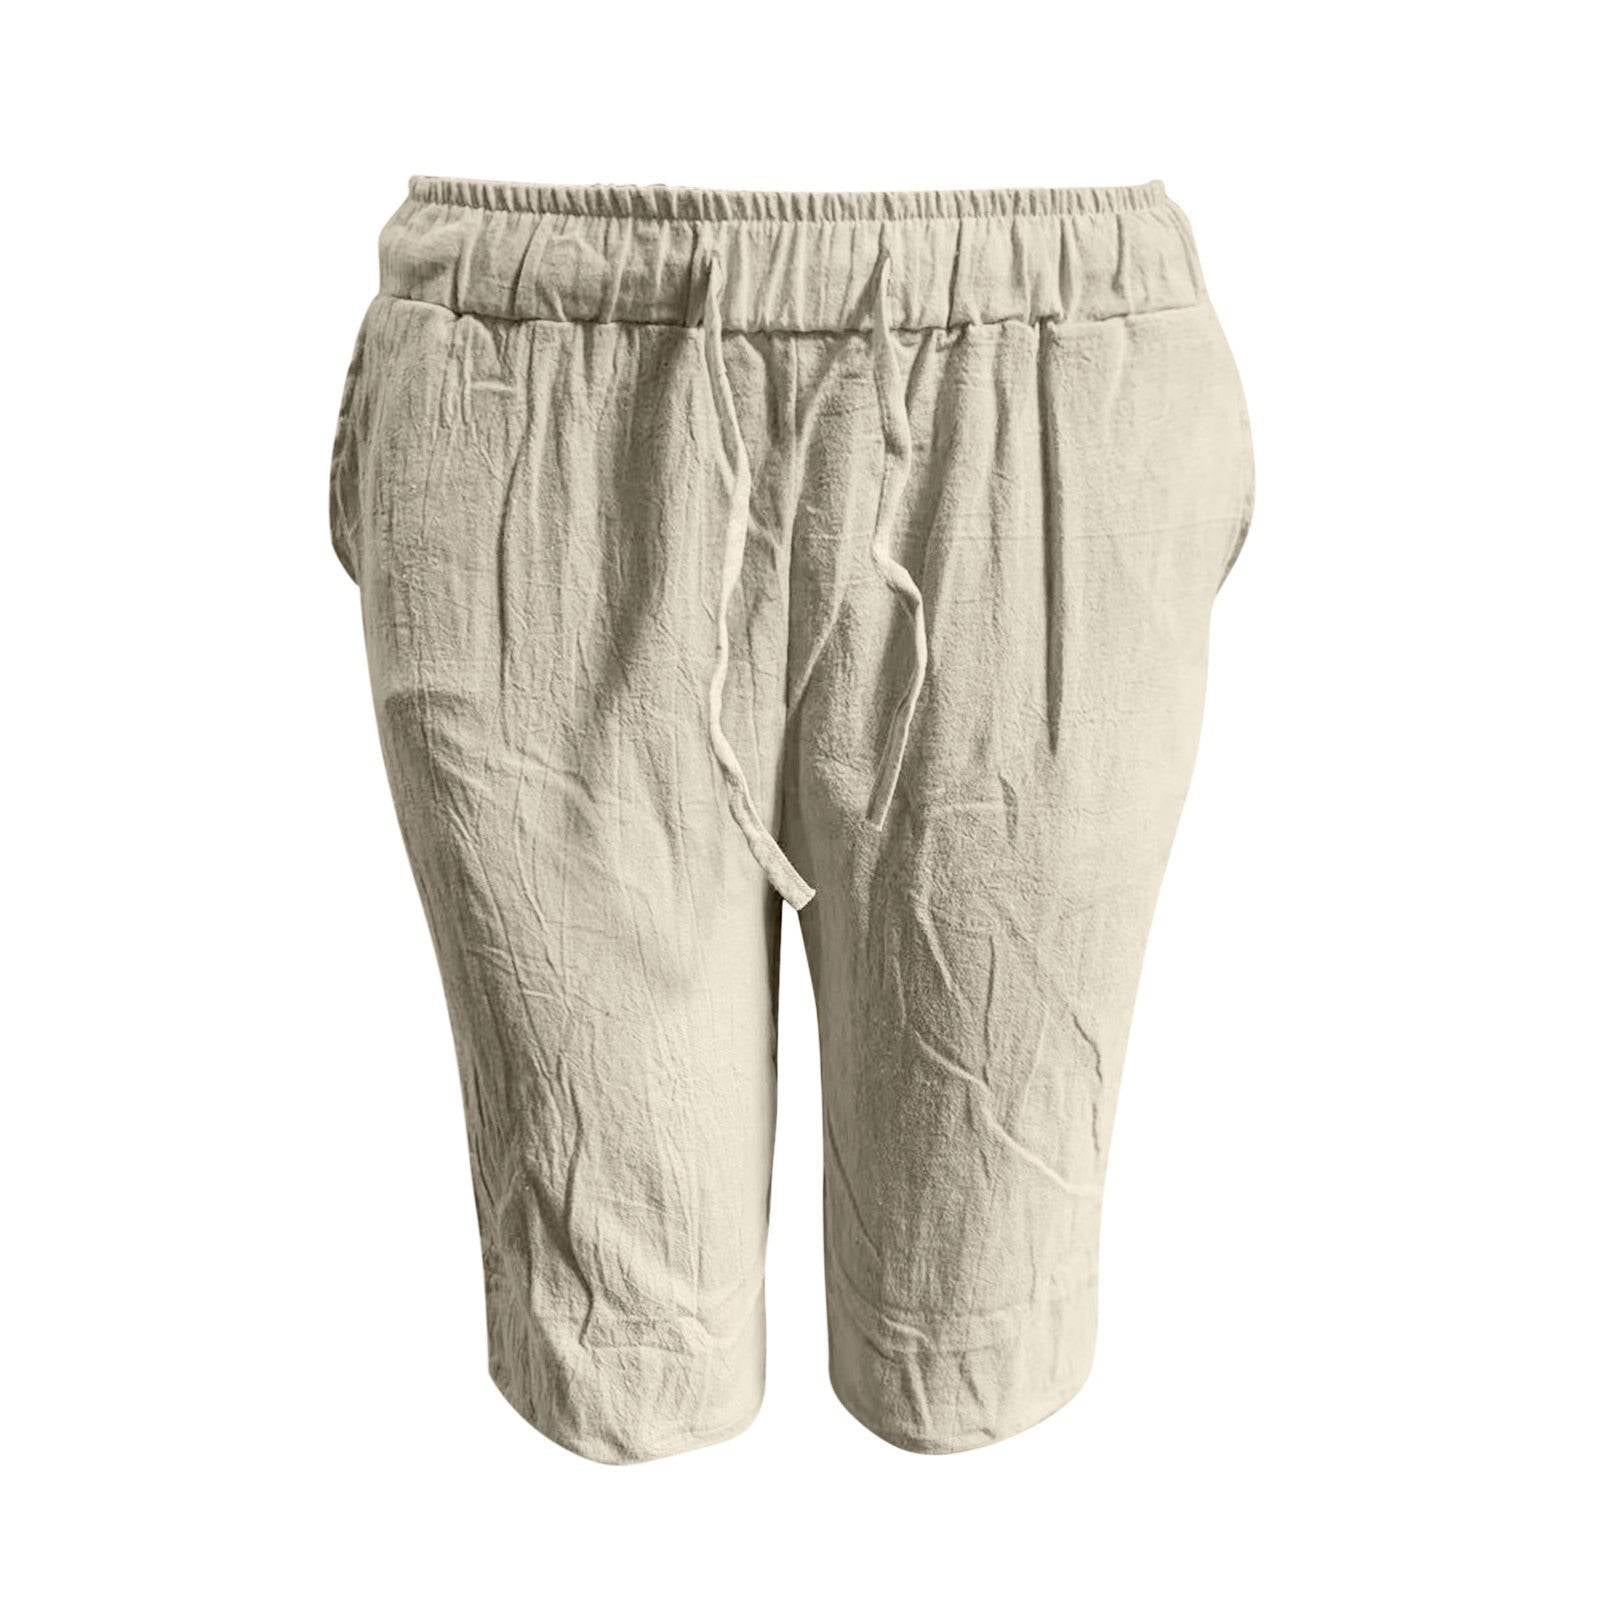 Men's lightweight breathable cotton linen shorts for home comfort in streetwear style0